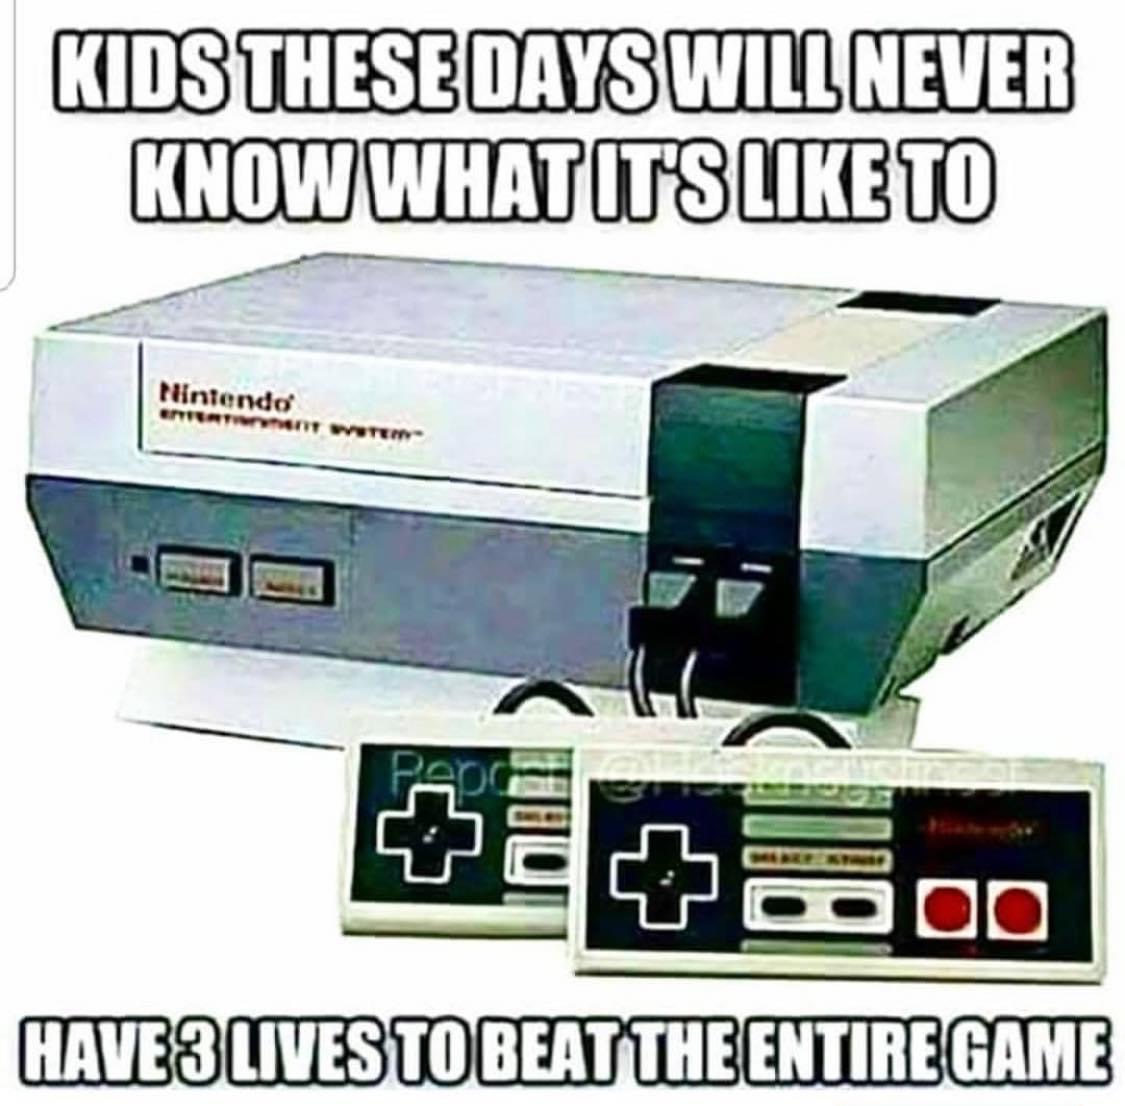 nintendo entertainment system - Kids These Days Will Never Know What It'S To Nintendo Tertit Wote Have 3 Lives To Beat The Entire Game